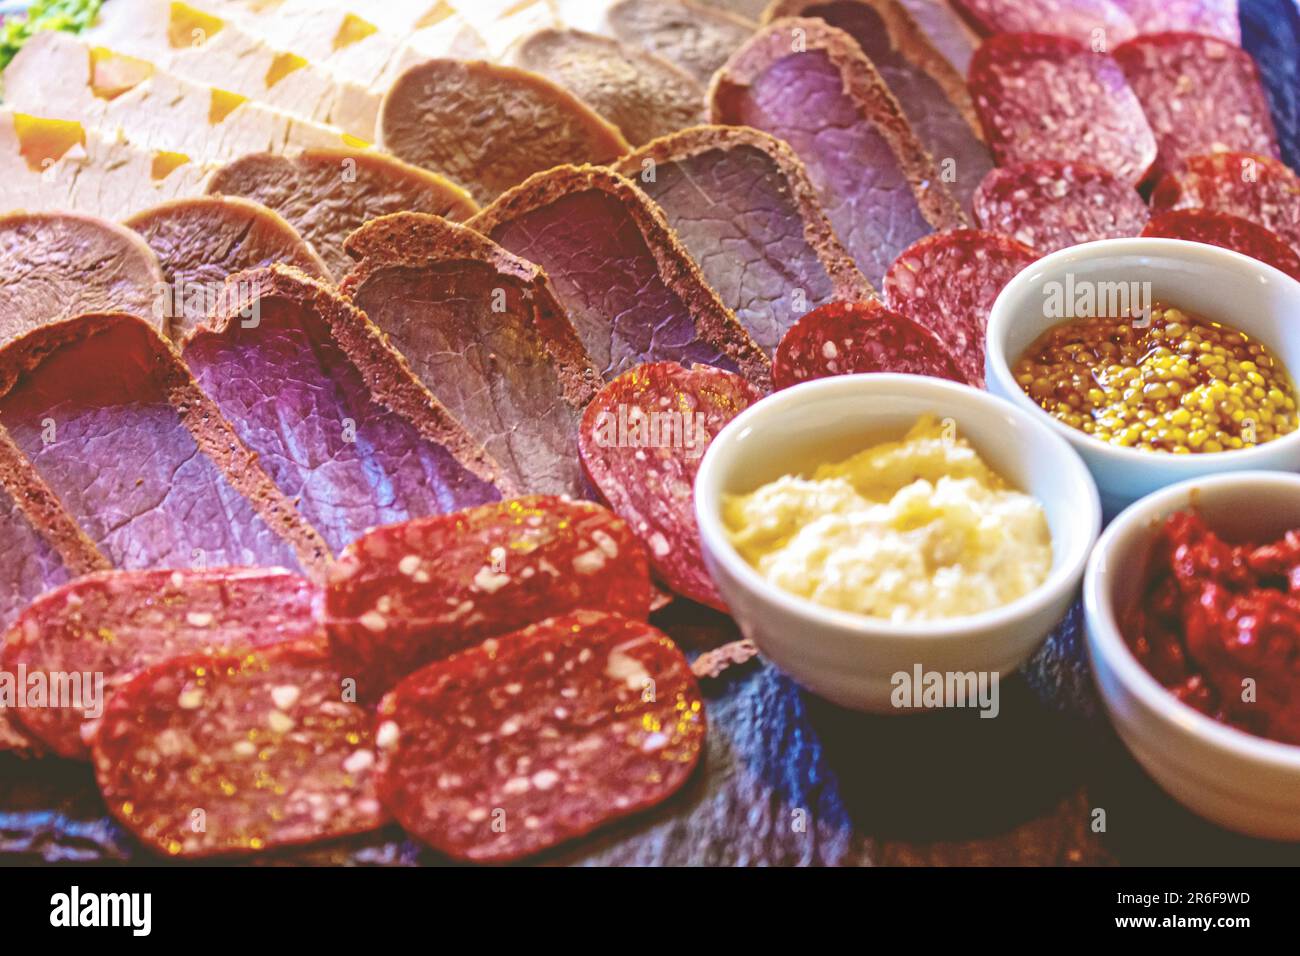 A large platter filled with a variety of charcuterie meats and dippers displayed on a table Stock Photo